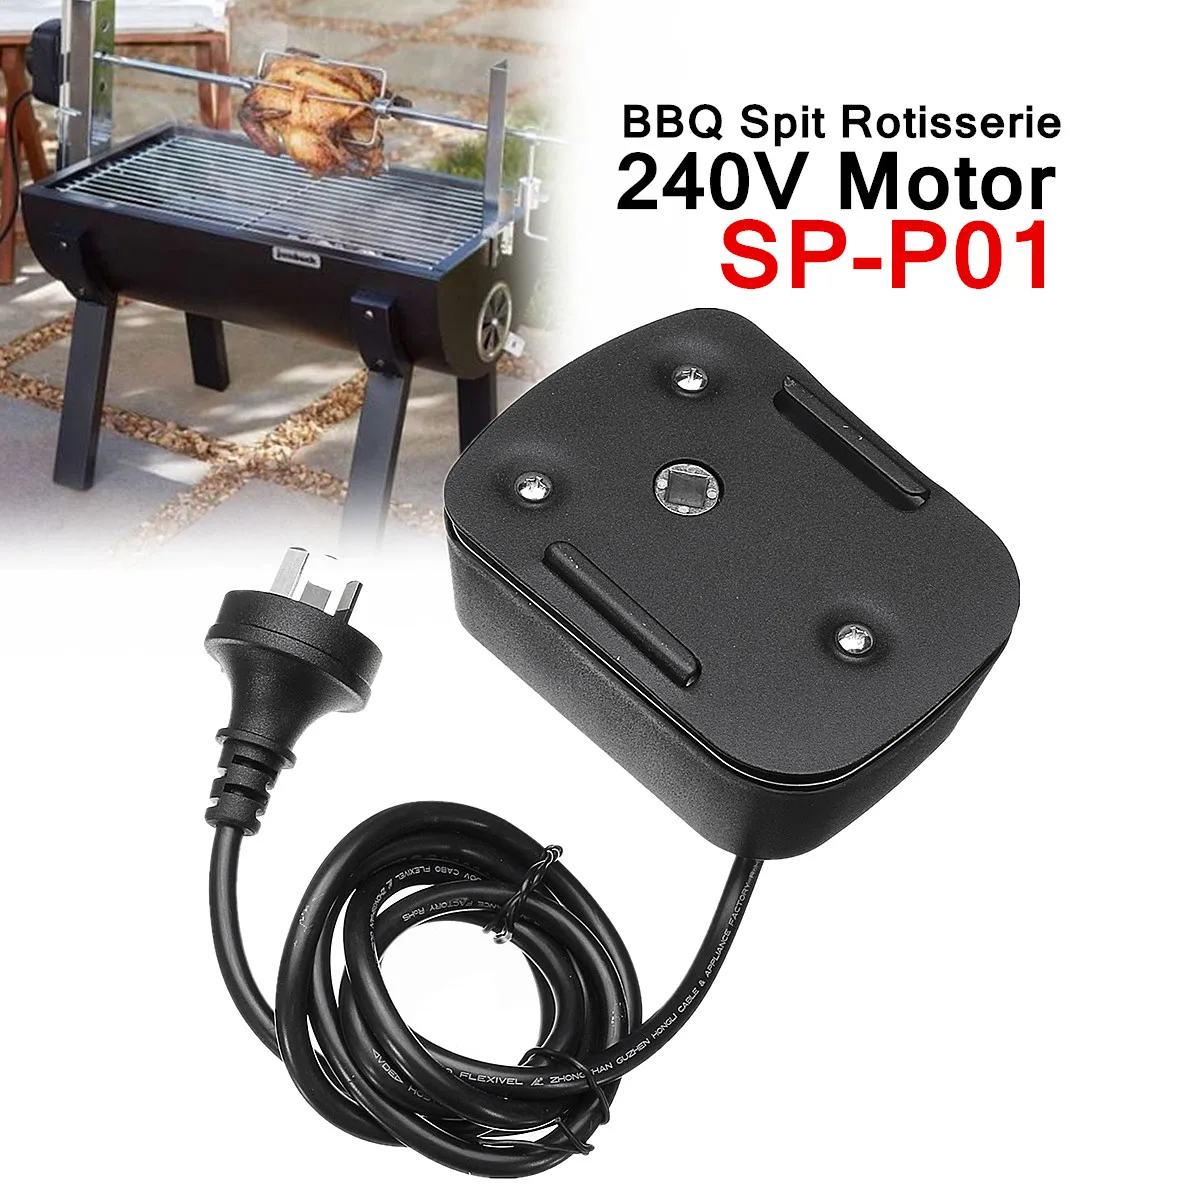 

SP-P01 Barbeque BBQ Spit Rotisserie 240V Motor For Roasted Lambs Piglets Chicken AU Plug 2-3R.P.M Speed